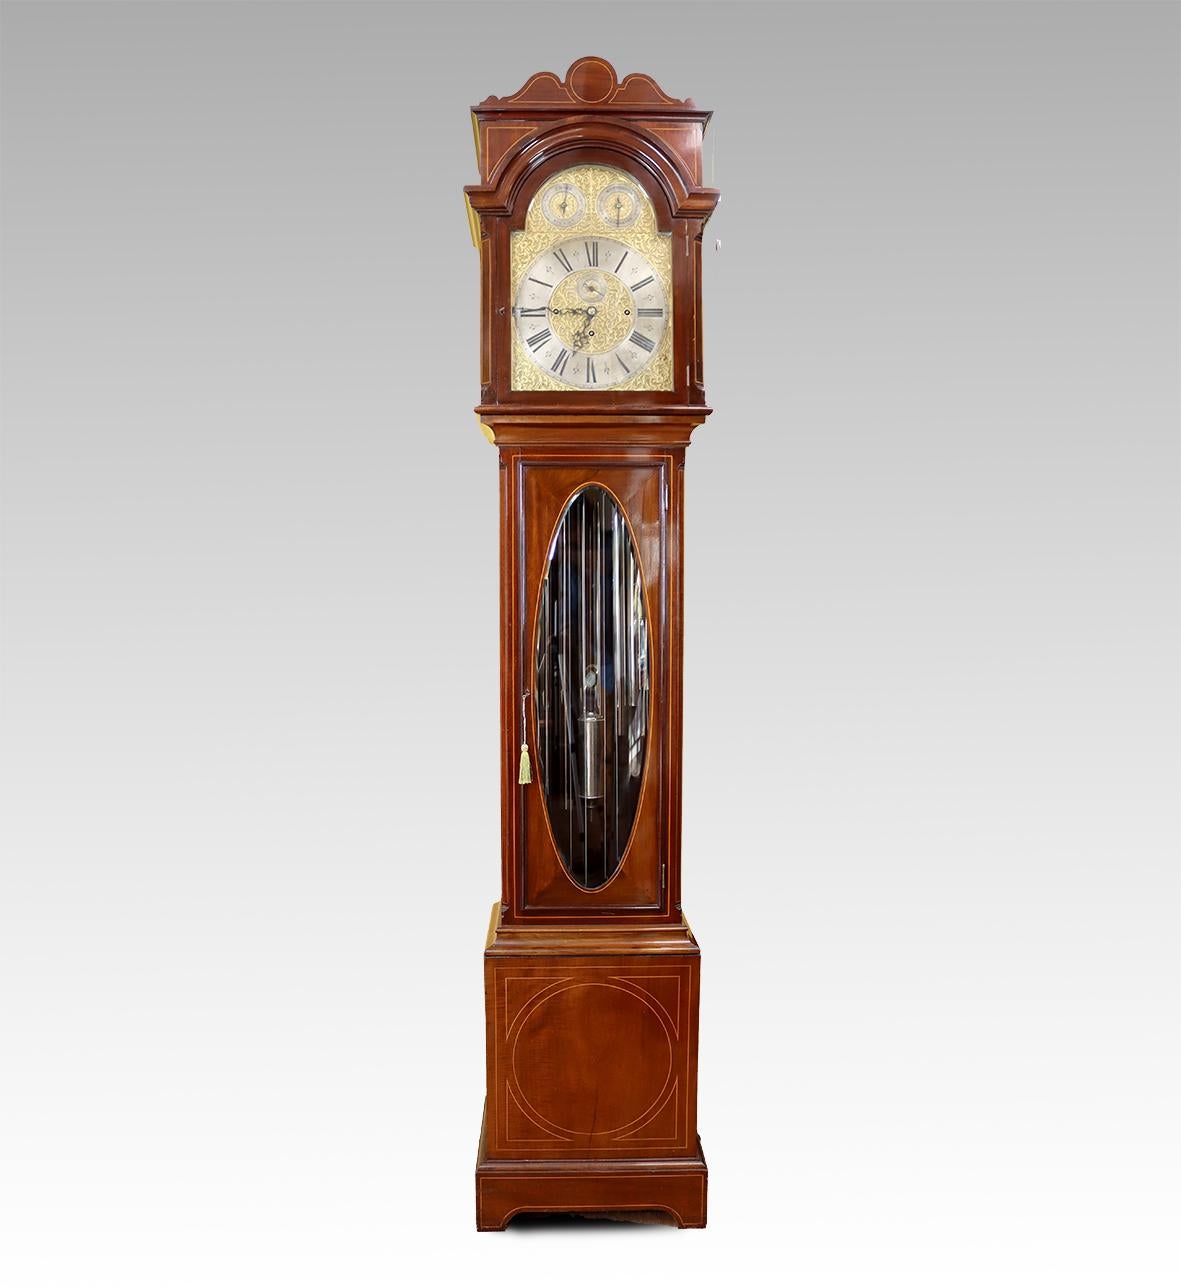 A very impressive quarter chiming tubular gong clock with a very high quality three train movement. The movement is of 8 day duration and strikes the quarter hours on eight chrome plated tubular gongs hanging from the rear of the case and the main